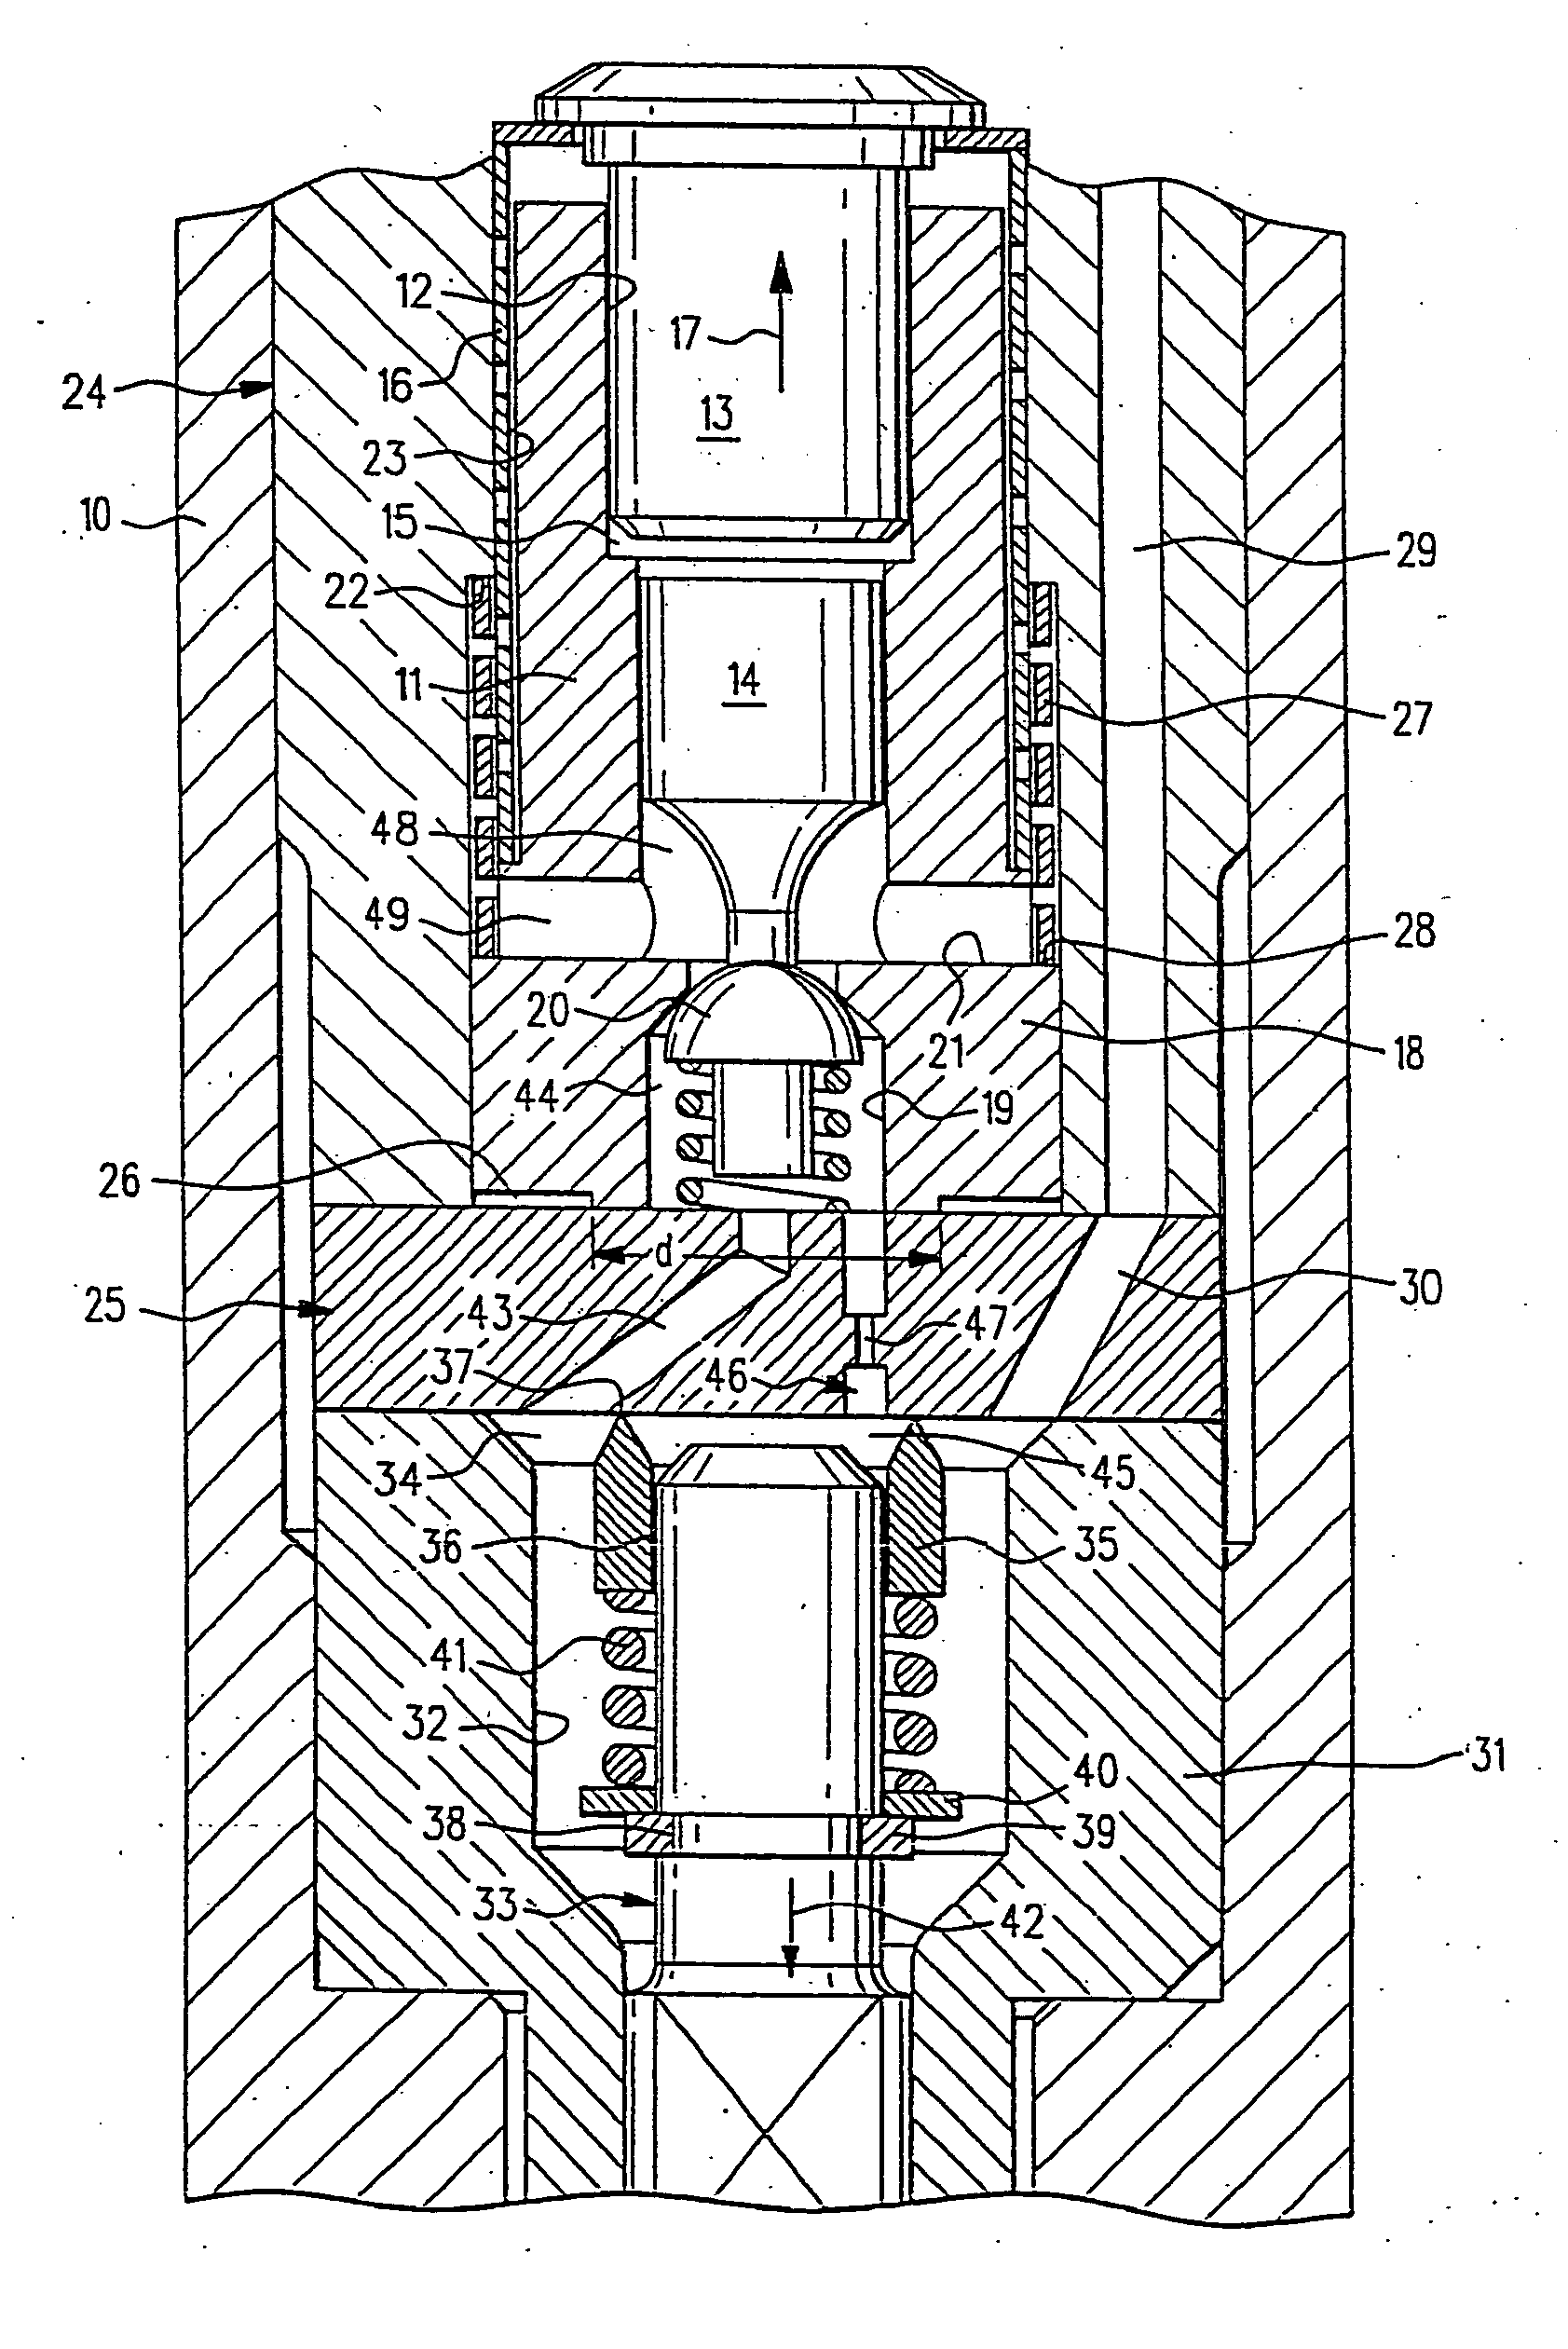 Injector for injecting fuel into combustion chambers of internal combustion engines, in particular a piezoelectric-actuator-controlled common rail injector